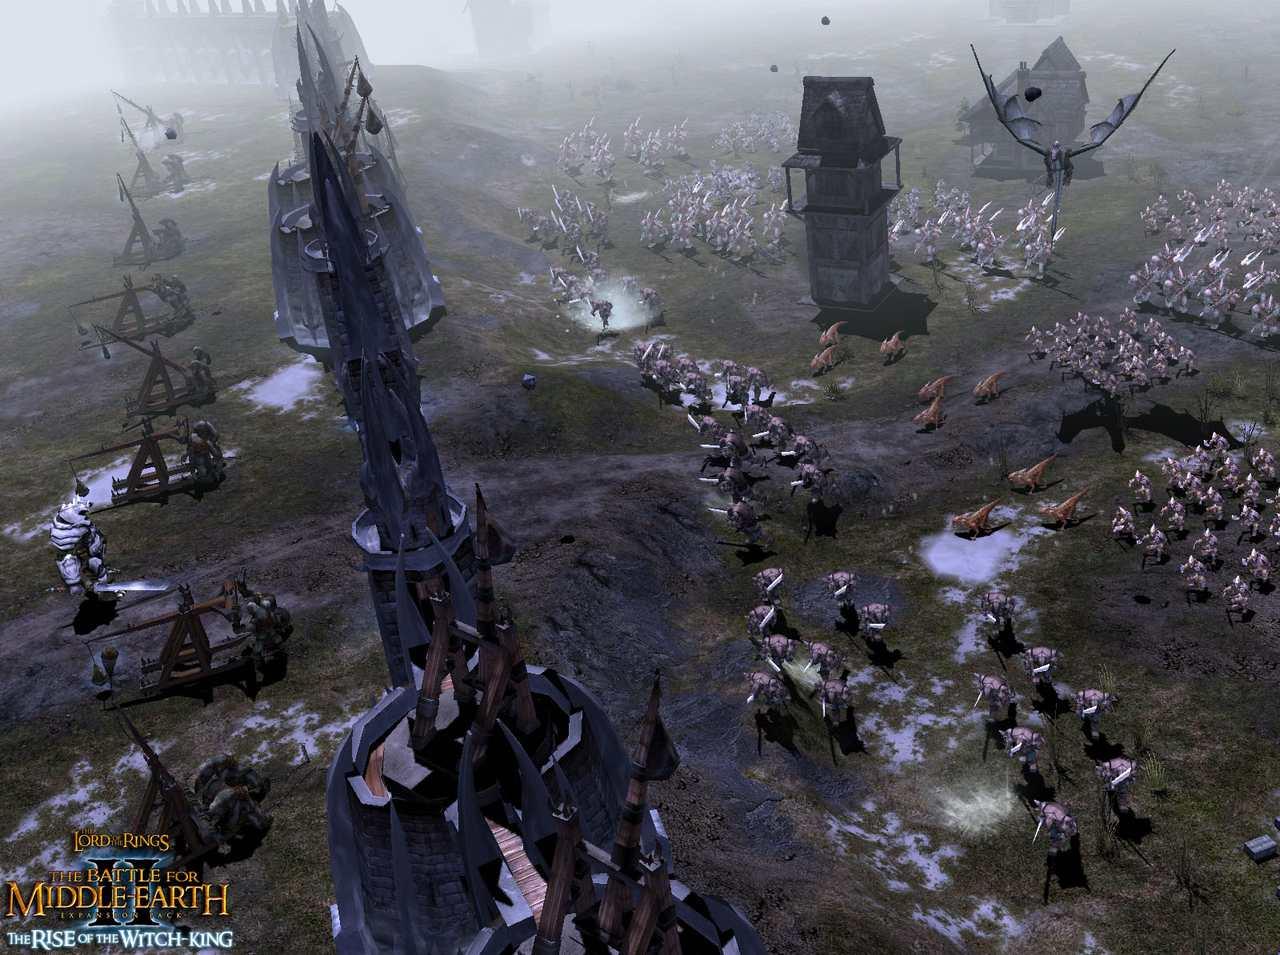 The Battle for Middle-earth II - The Rise of the Witch-king